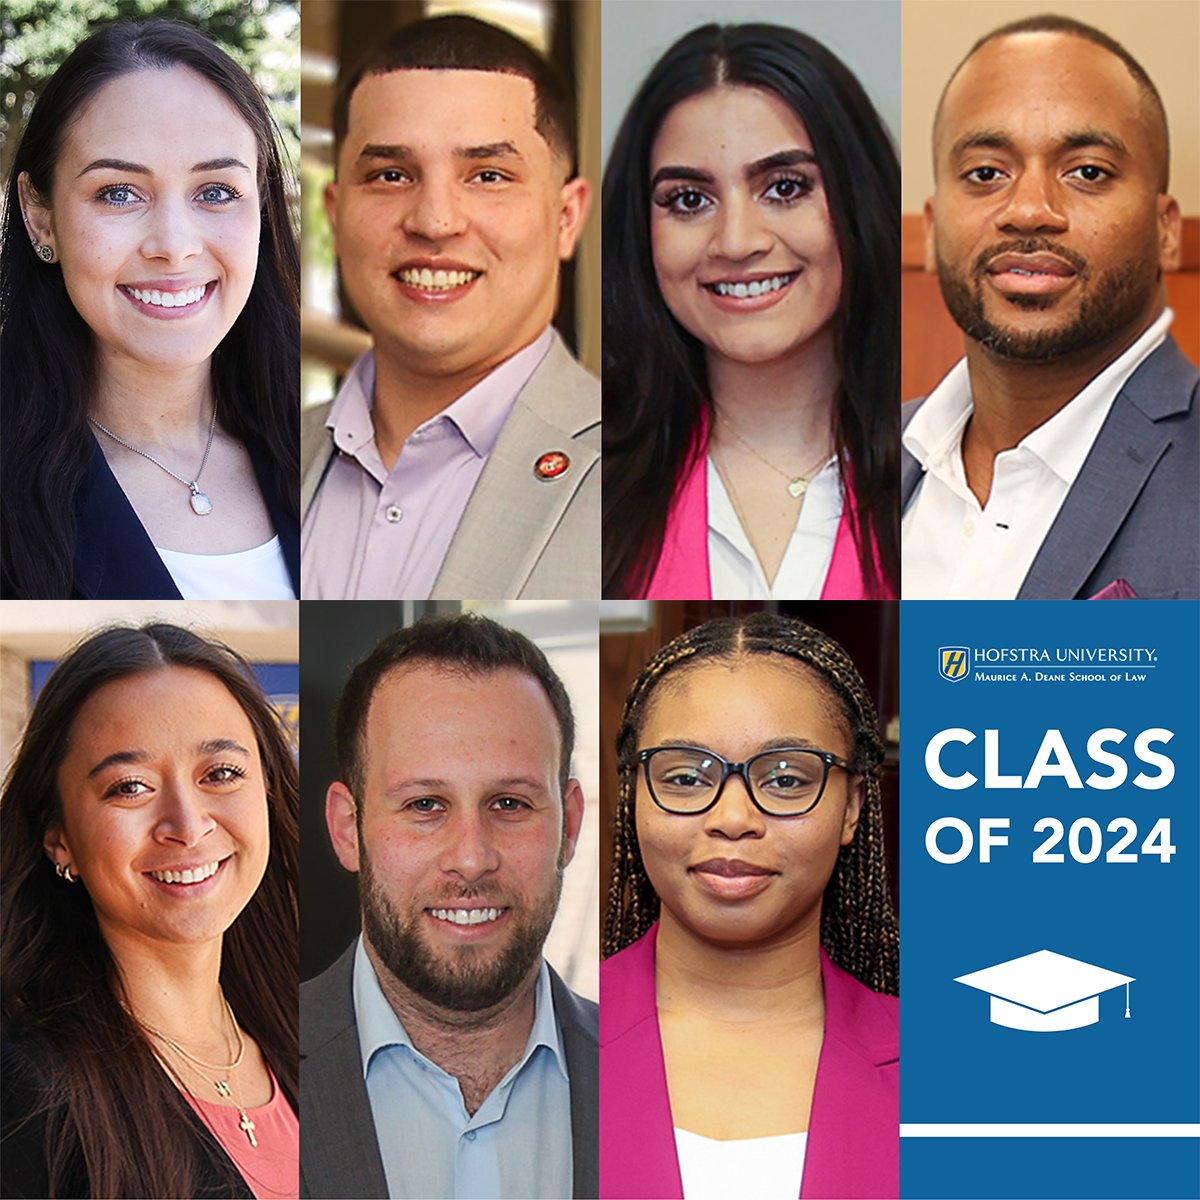 👨‍🎓👩‍🎓🎉We're heading into Hofstra Law Commencement weekend! Check out some of our students' post-graduate plans: law.hofstra.edu/commencement/ #Classof2024 #lawschool #lawtwitter